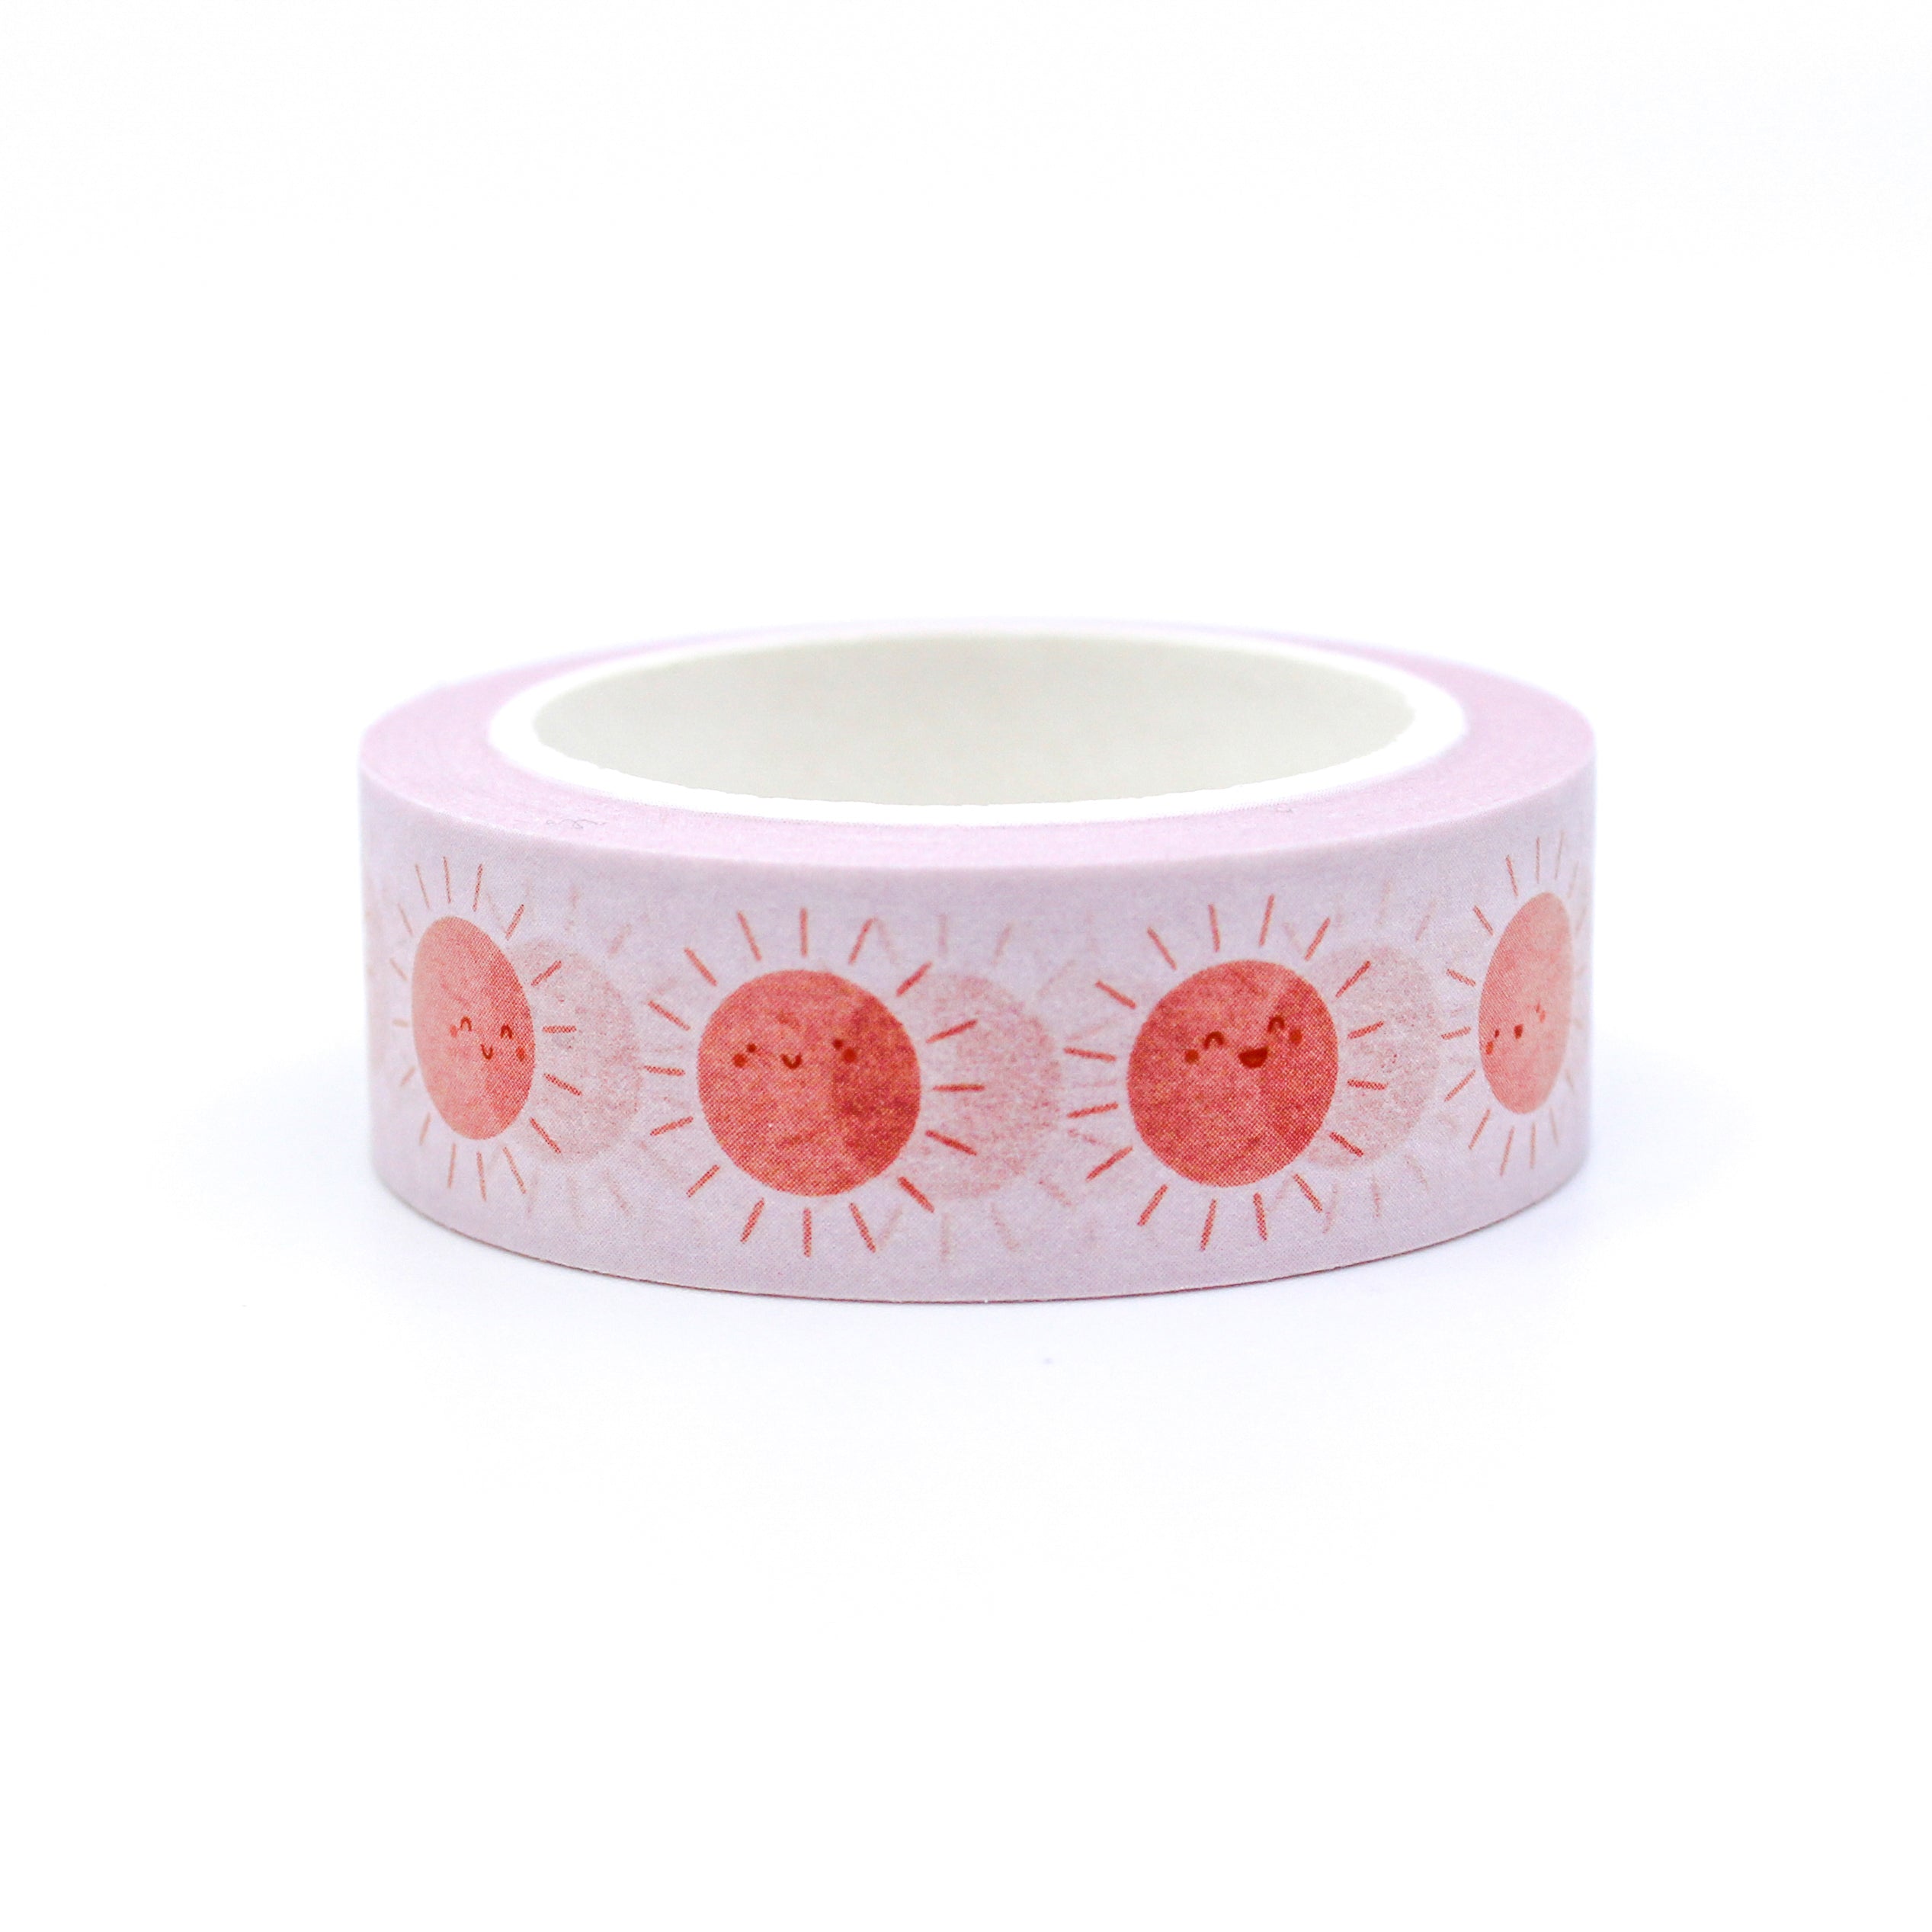 This is a full pattern repeat view of smiley sunshine themed washi tape from BBB Supplies Craft Shop